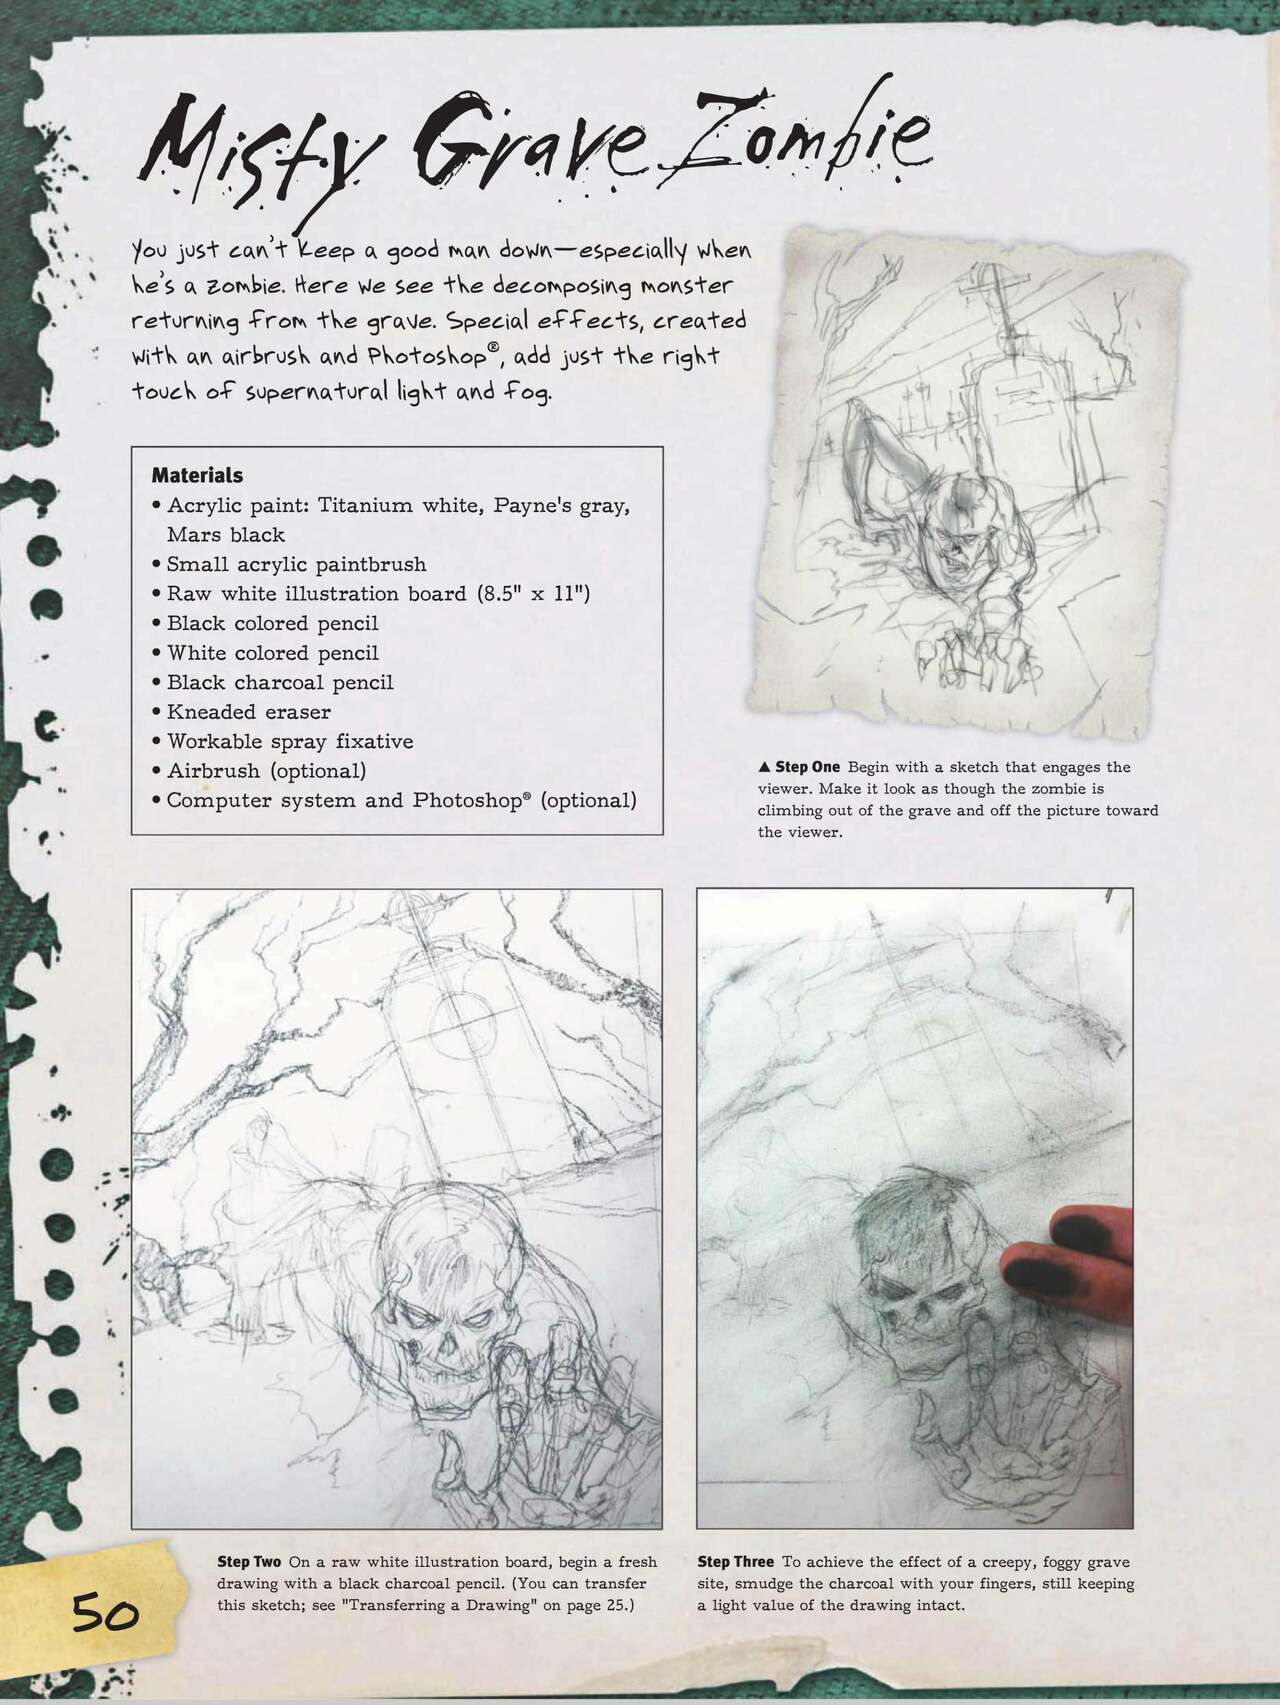 How to Draw Zombies: Discover the secrets to drawing, painting, and illustrating the undead 僵尸描绘集 51